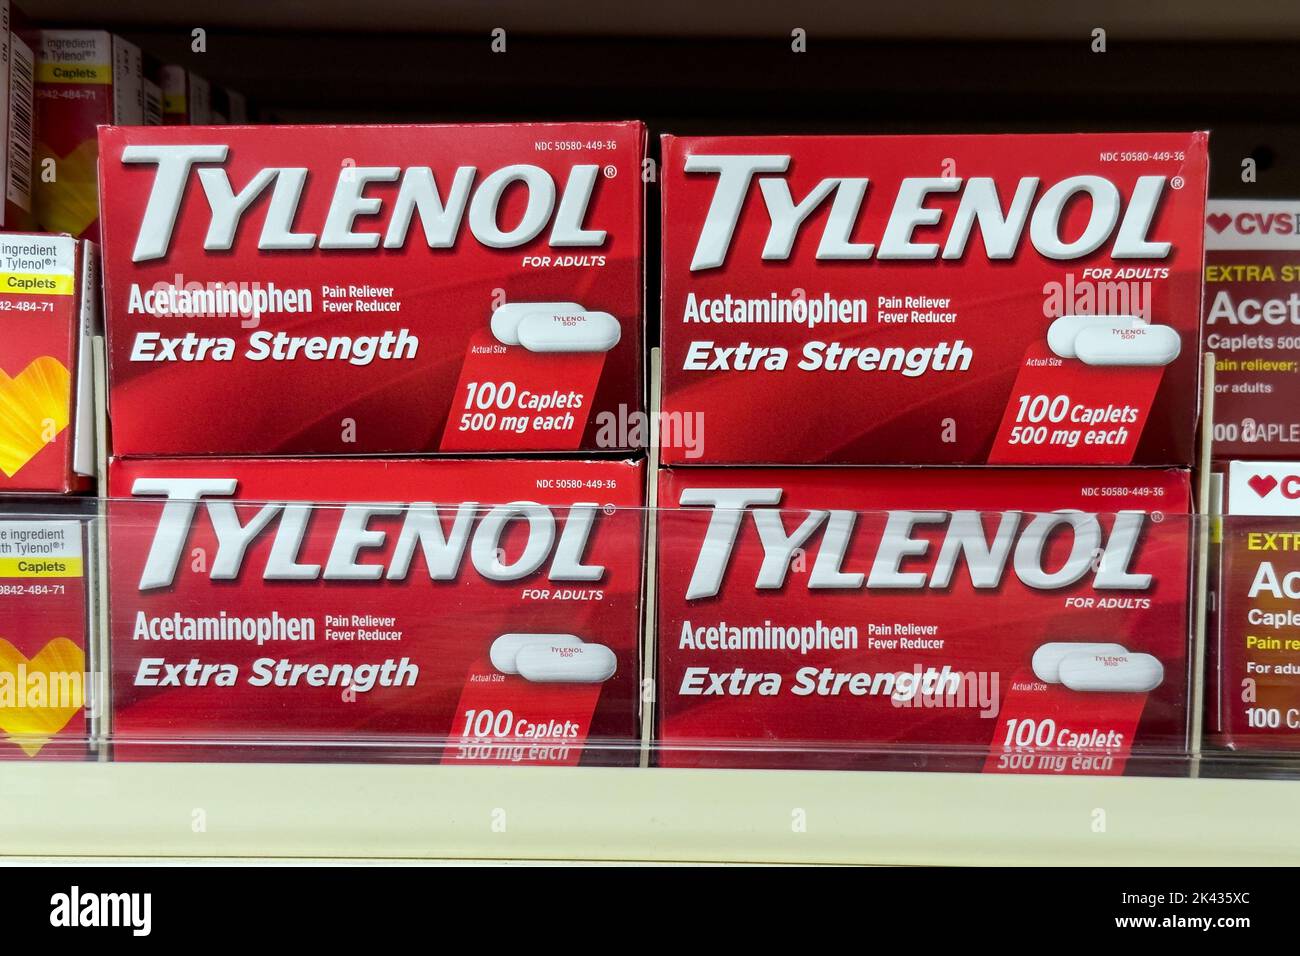 Novi, Michigan, USA - Sep 29, 2022: Boxes of Tylenol pain reliever on shelves in a pharmacy. Tylenol is distributed by McNeil Consumer Healthcare, a s Stock Photo